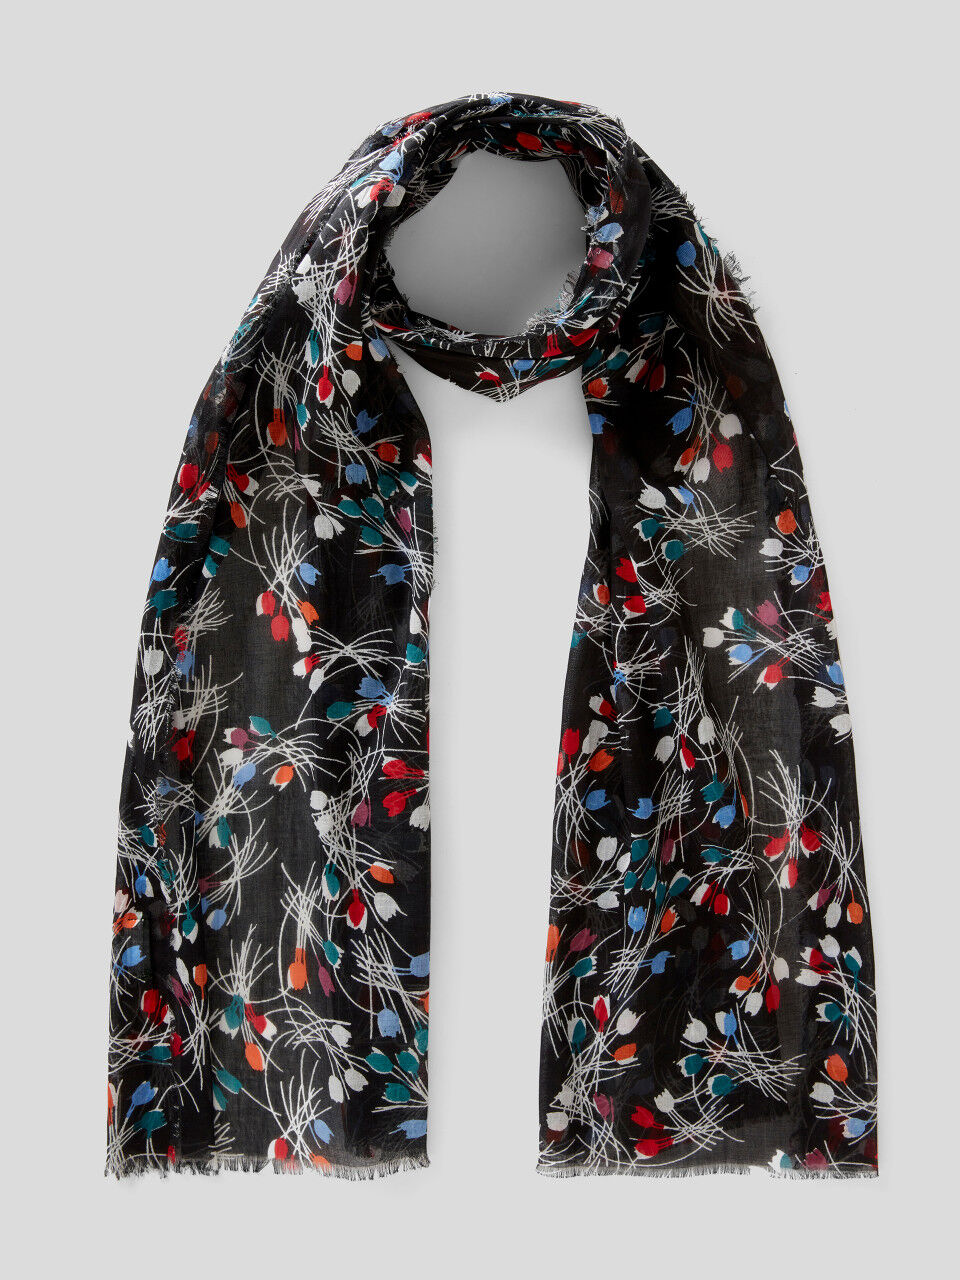 United Colors of Benetton Women's Blur Printed Wool Scarf Black One Size 